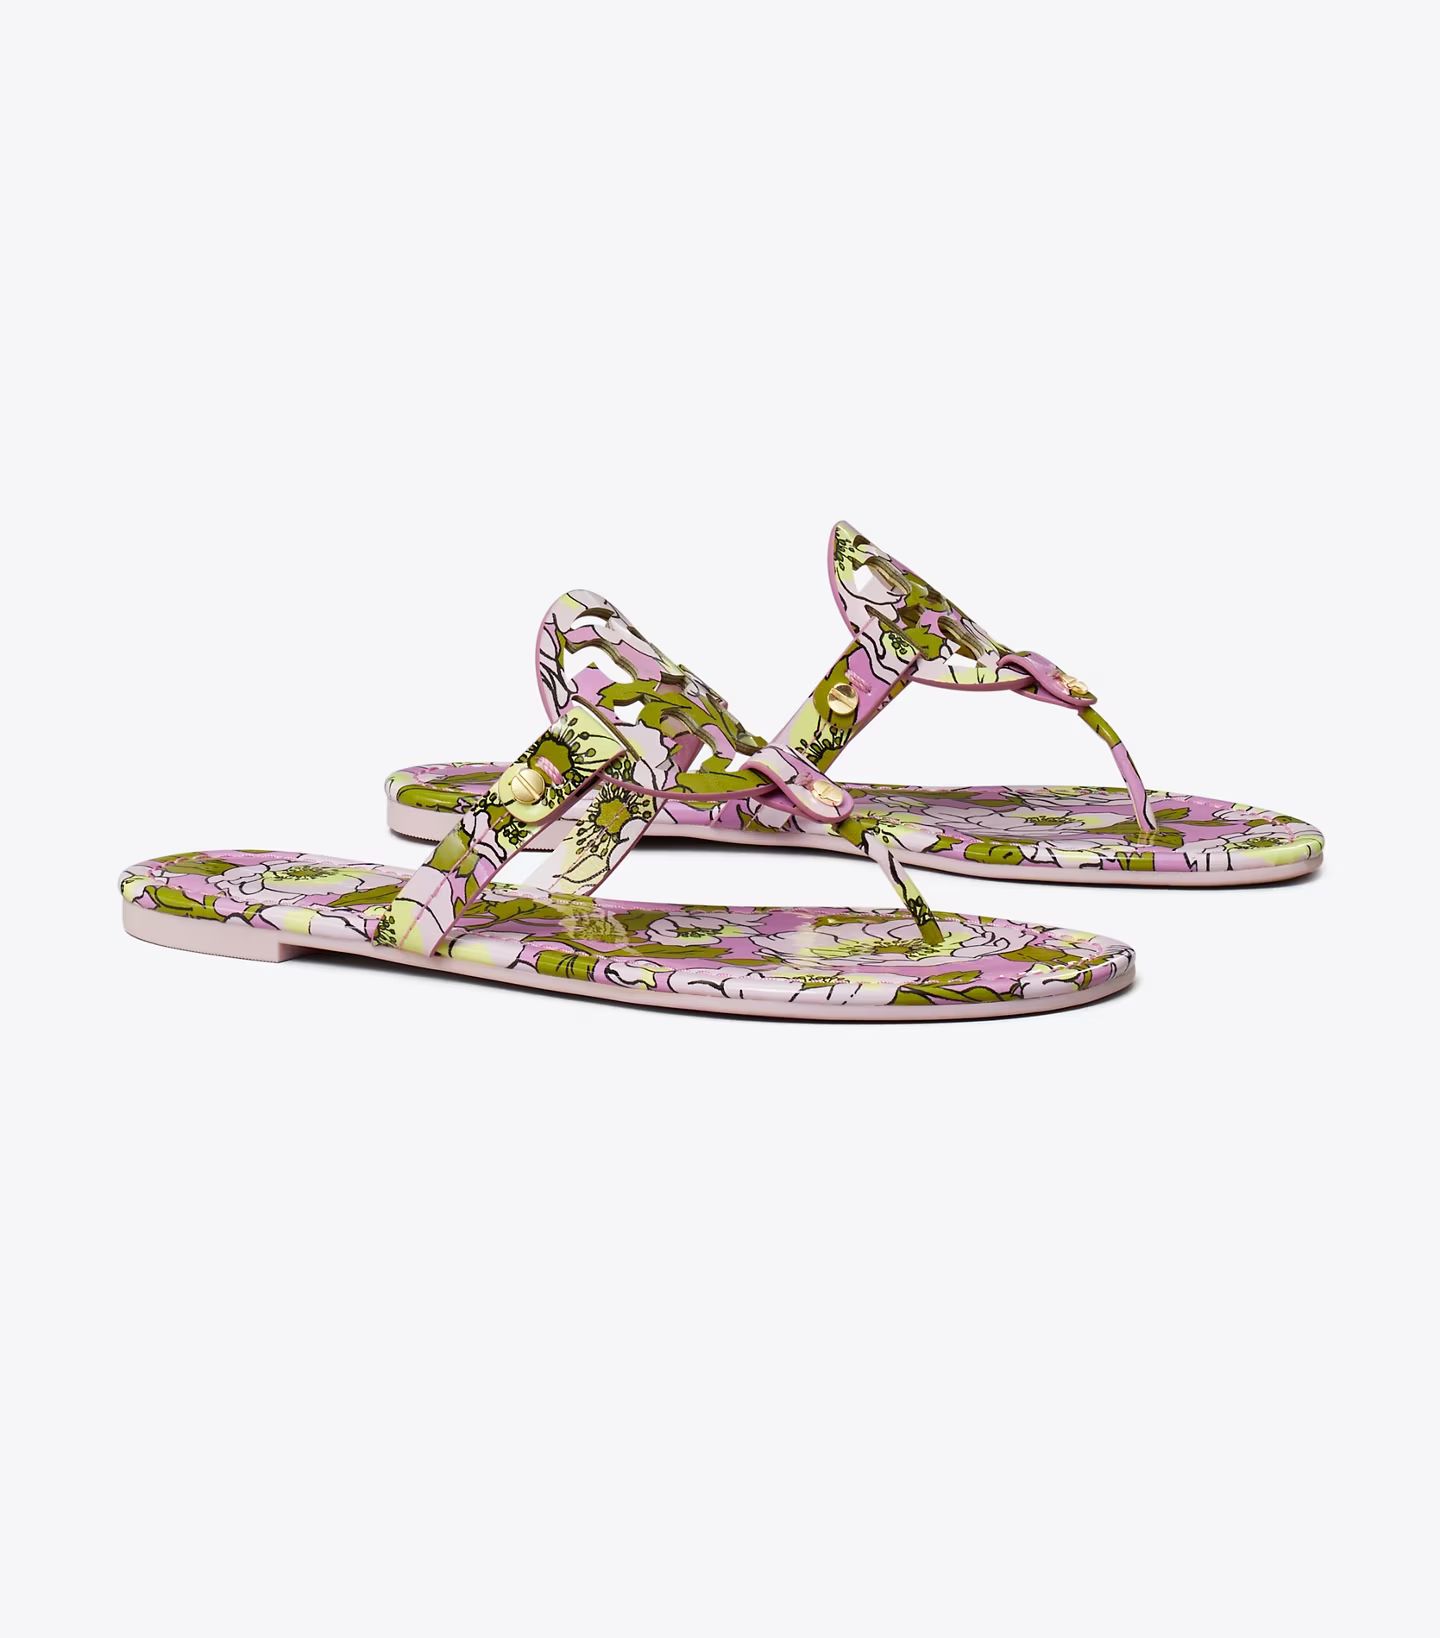 MILLER SANDAL, PRINTED PATENT LEATHER | Tory Burch (US)